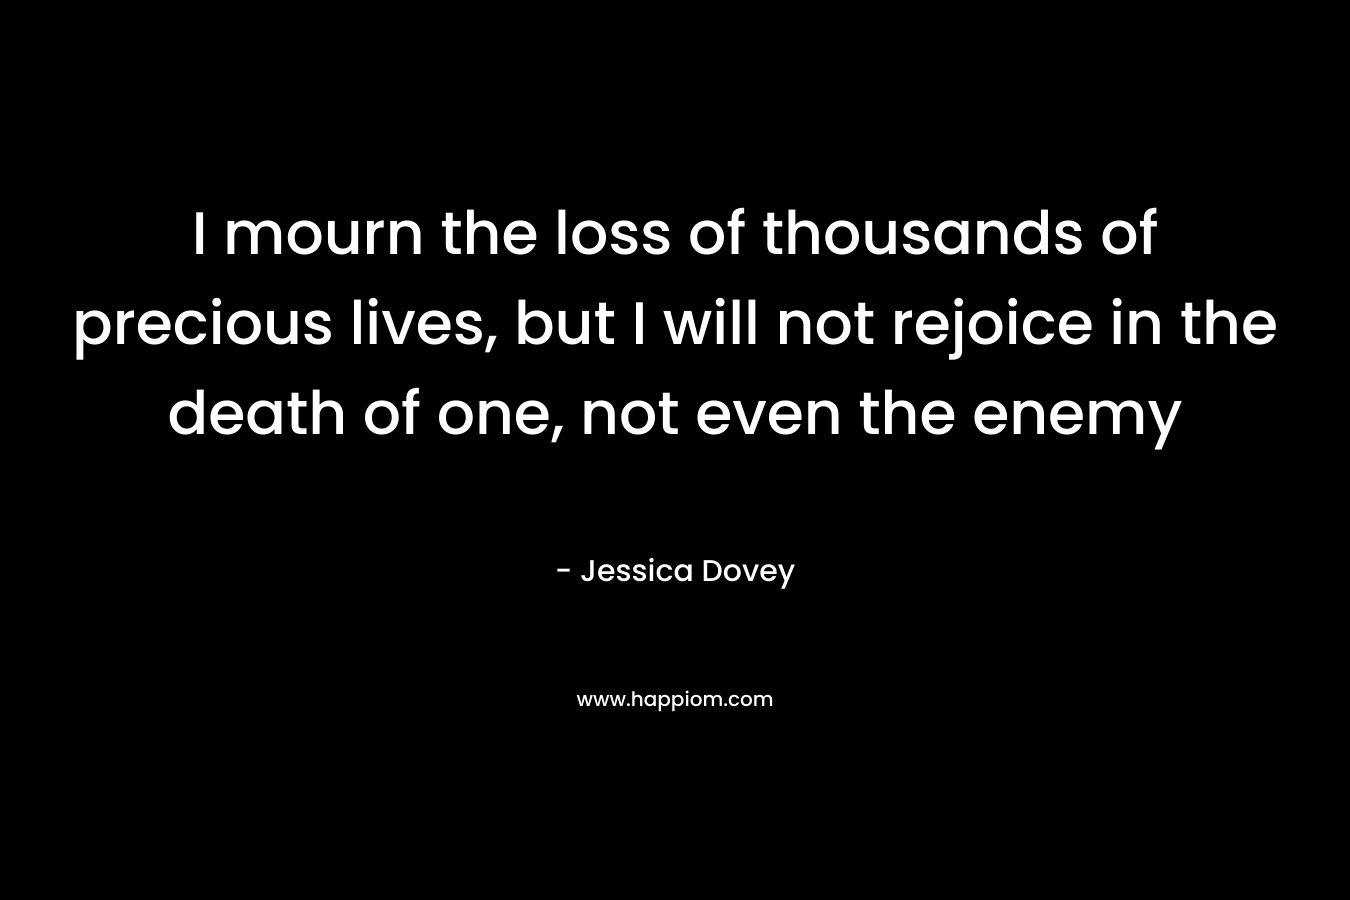 I mourn the loss of thousands of precious lives, but I will not rejoice in the death of one, not even the enemy – Jessica Dovey